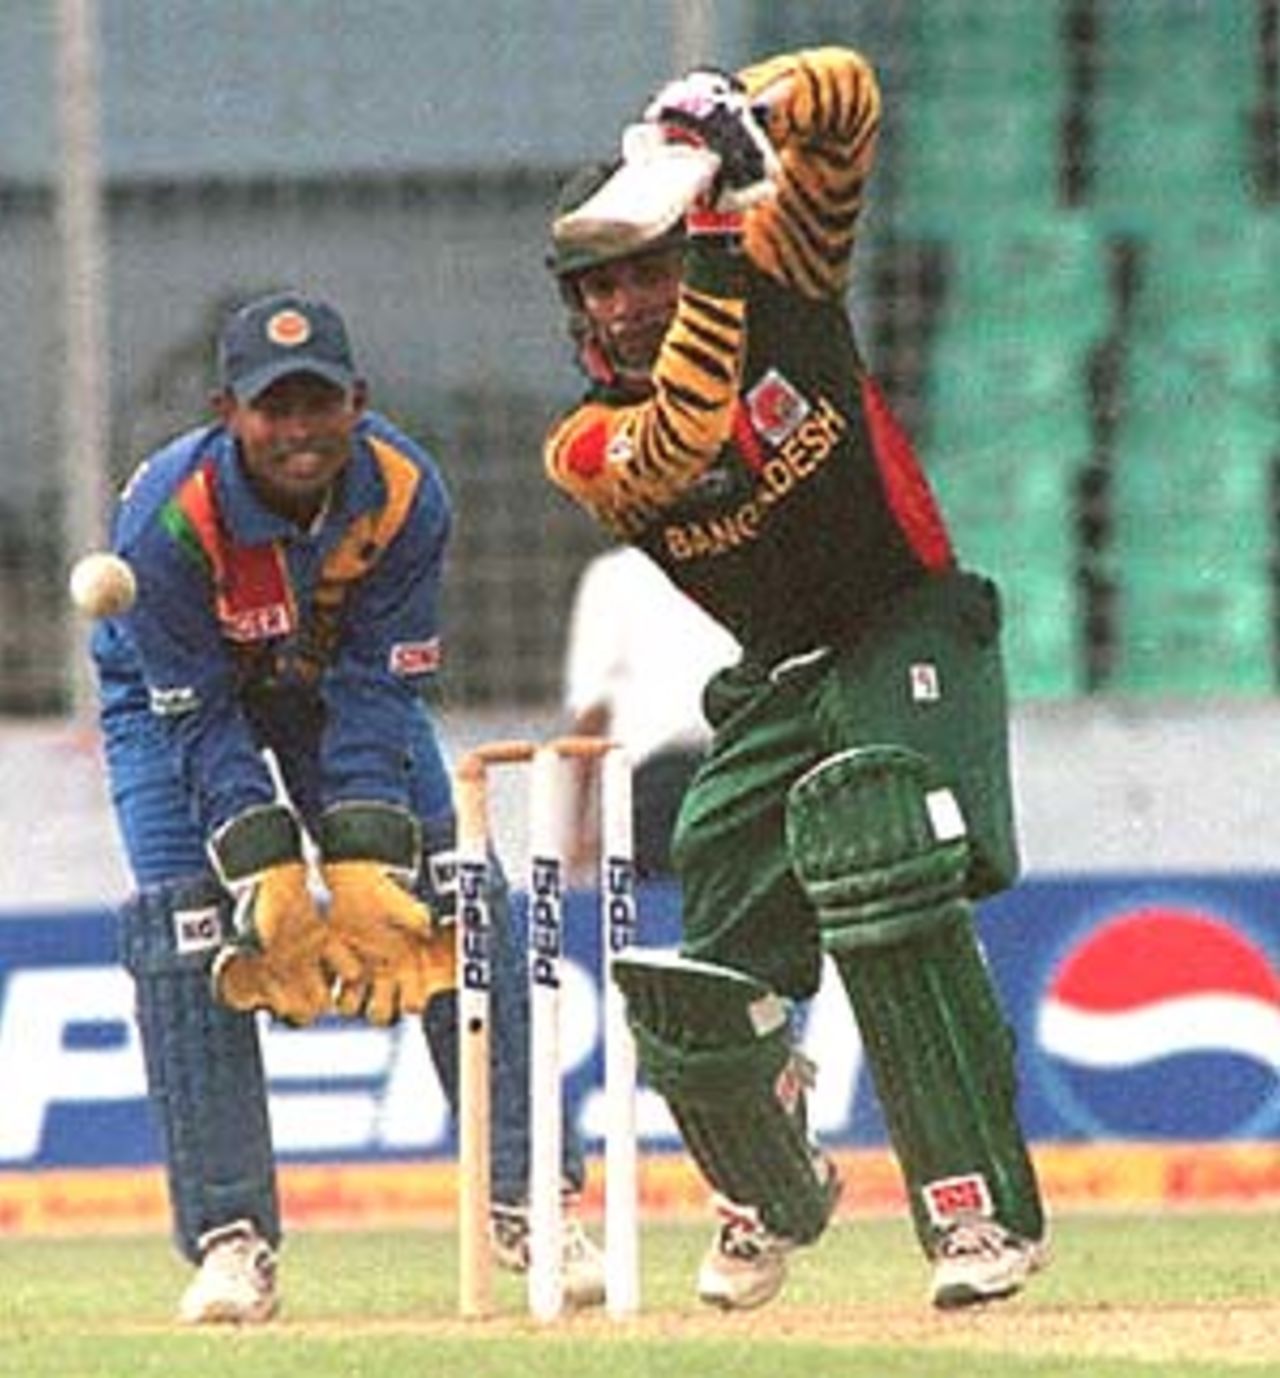 Bangladesh opener Javed Omar drives on his way to an unbeaten 85 against Sri Lanka in the opening match of the four-nation Asia Cup limited-overs tournament at the Bangabandhu national stadium in Dhaka 29 May 2000. Sri Lankan wicket-keeper Romesh Kaluwitharana waits with open gloves. India and Pakistan are the other teams in the tournament to determine the regional one-day champions. Bangladesh v Sri Lanka, Asia Cup, 1999/00, Bangabandhu National Stadium, Dhaka 29 May 2000.